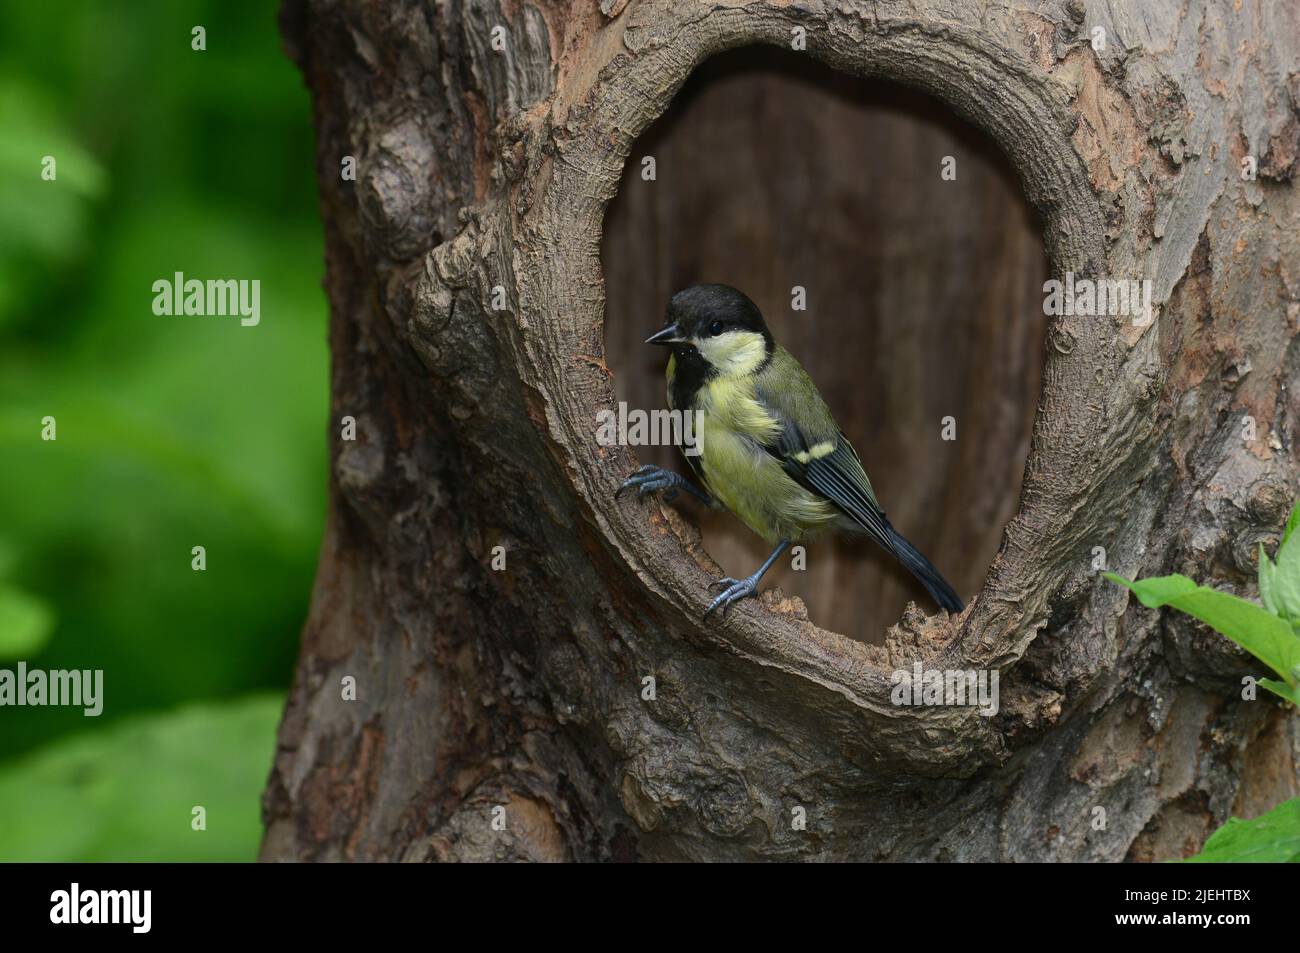 Juvenile great tit perched at rest in tree hollow Stock Photo